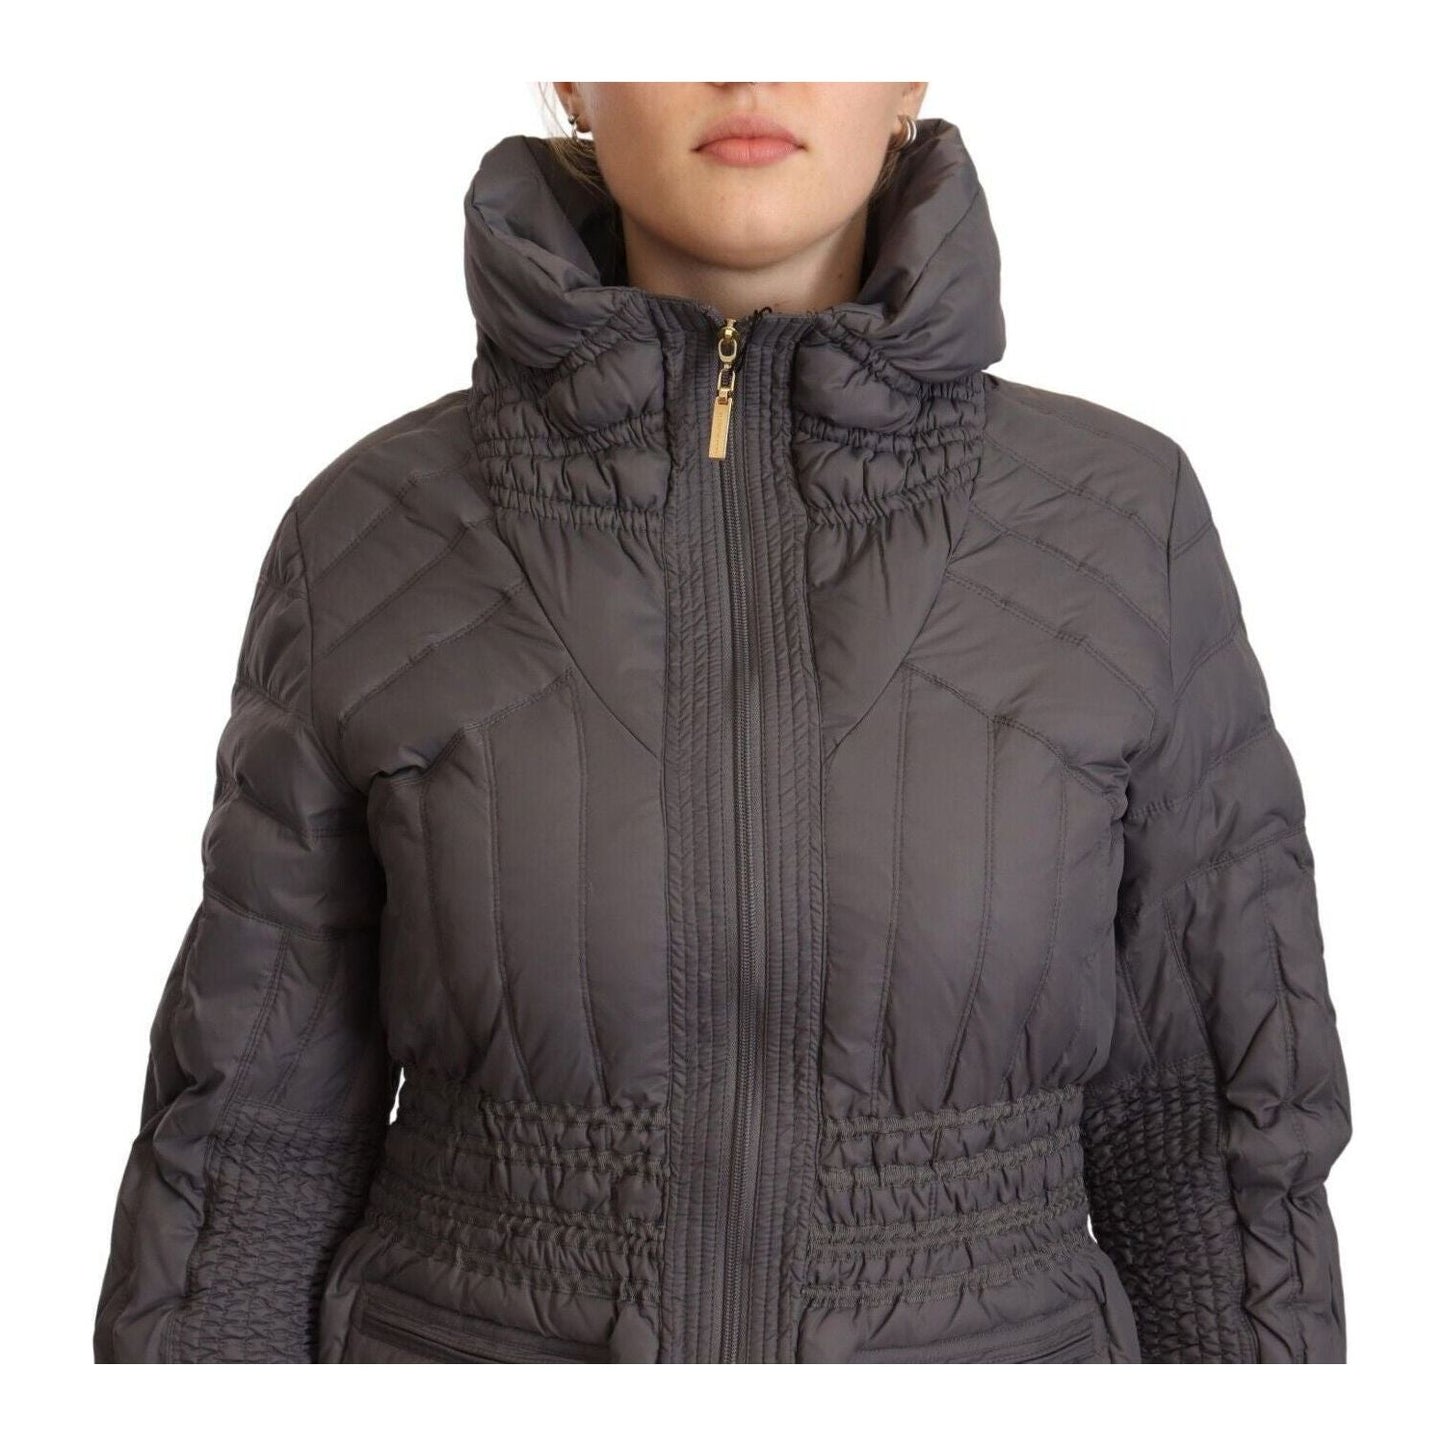 Roccobarocco Elegant Quilted Long Jacket with Logo Patch gray-quilted-long-sleeves-logo-patch-full-zip-jacket s-l1600-13-1-b89ca231-d48.jpg